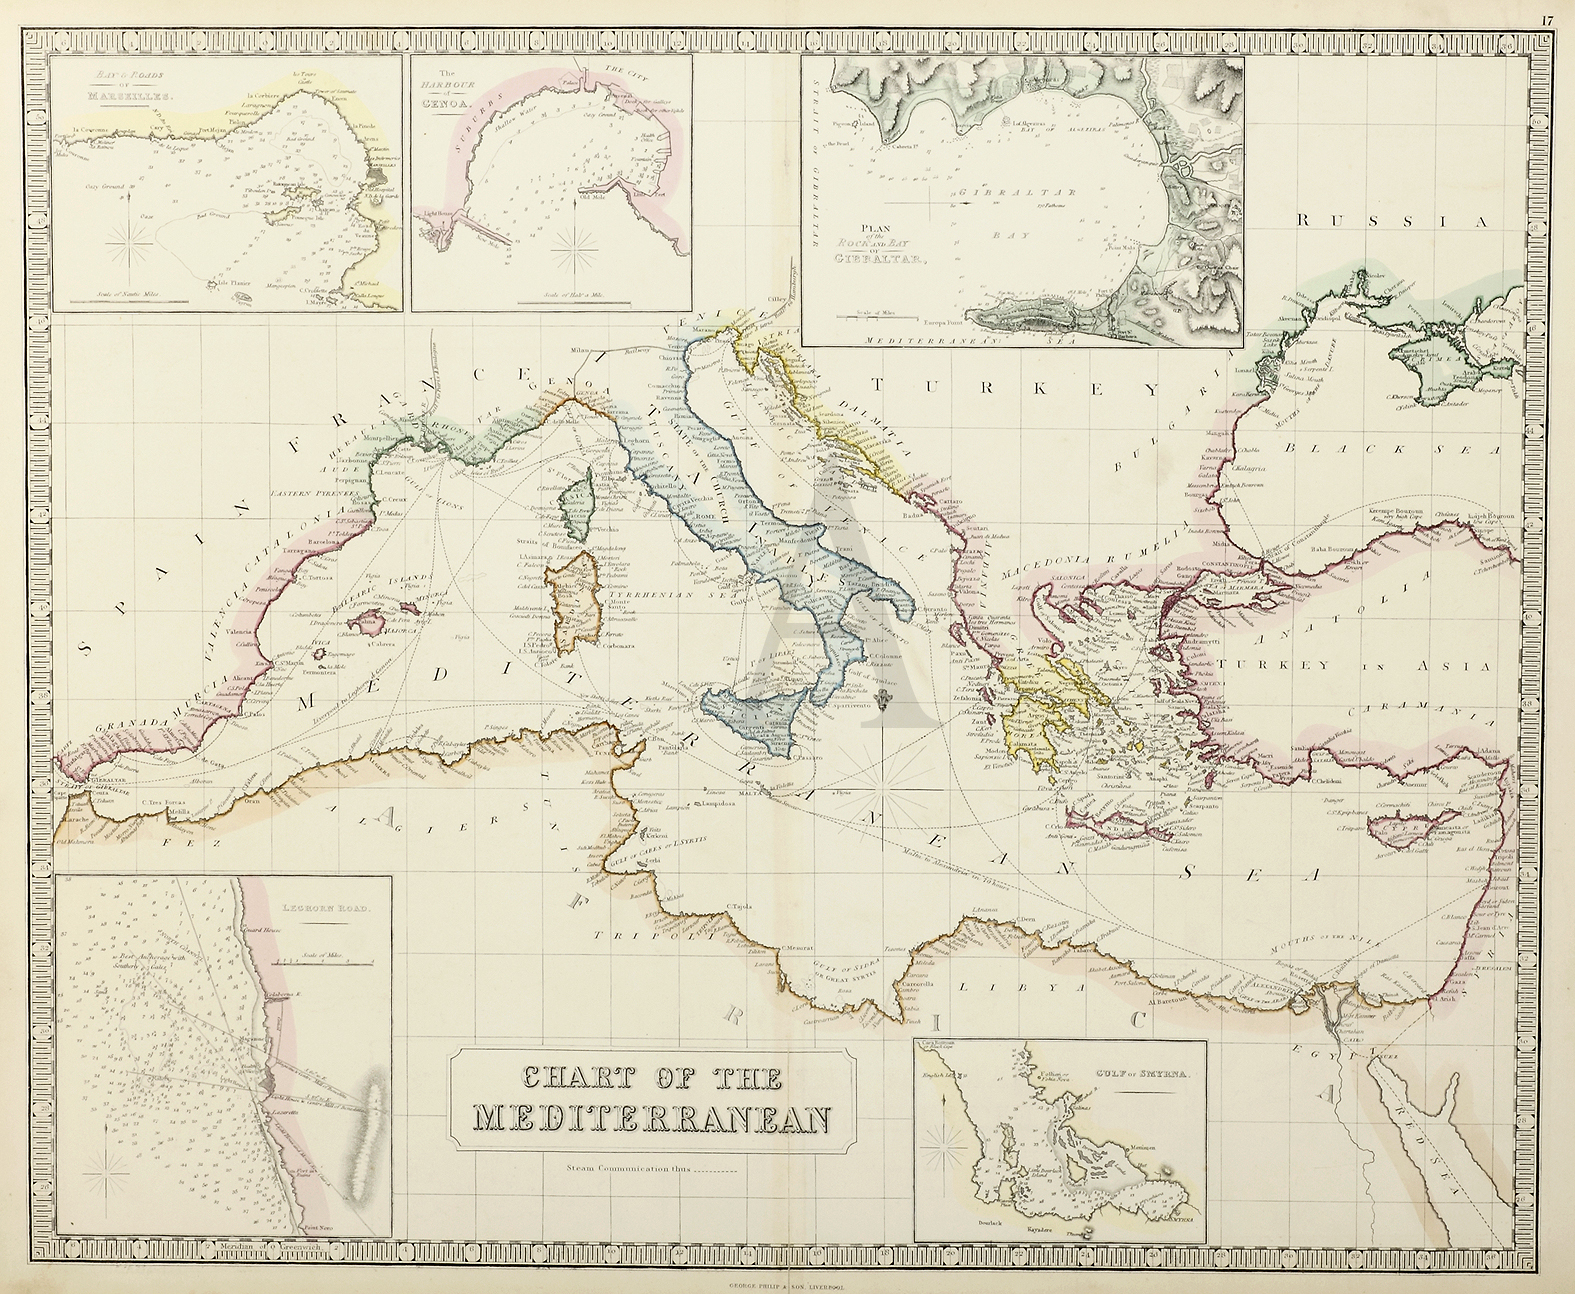 Chart of the Mediterranean - Antique Print from 1860